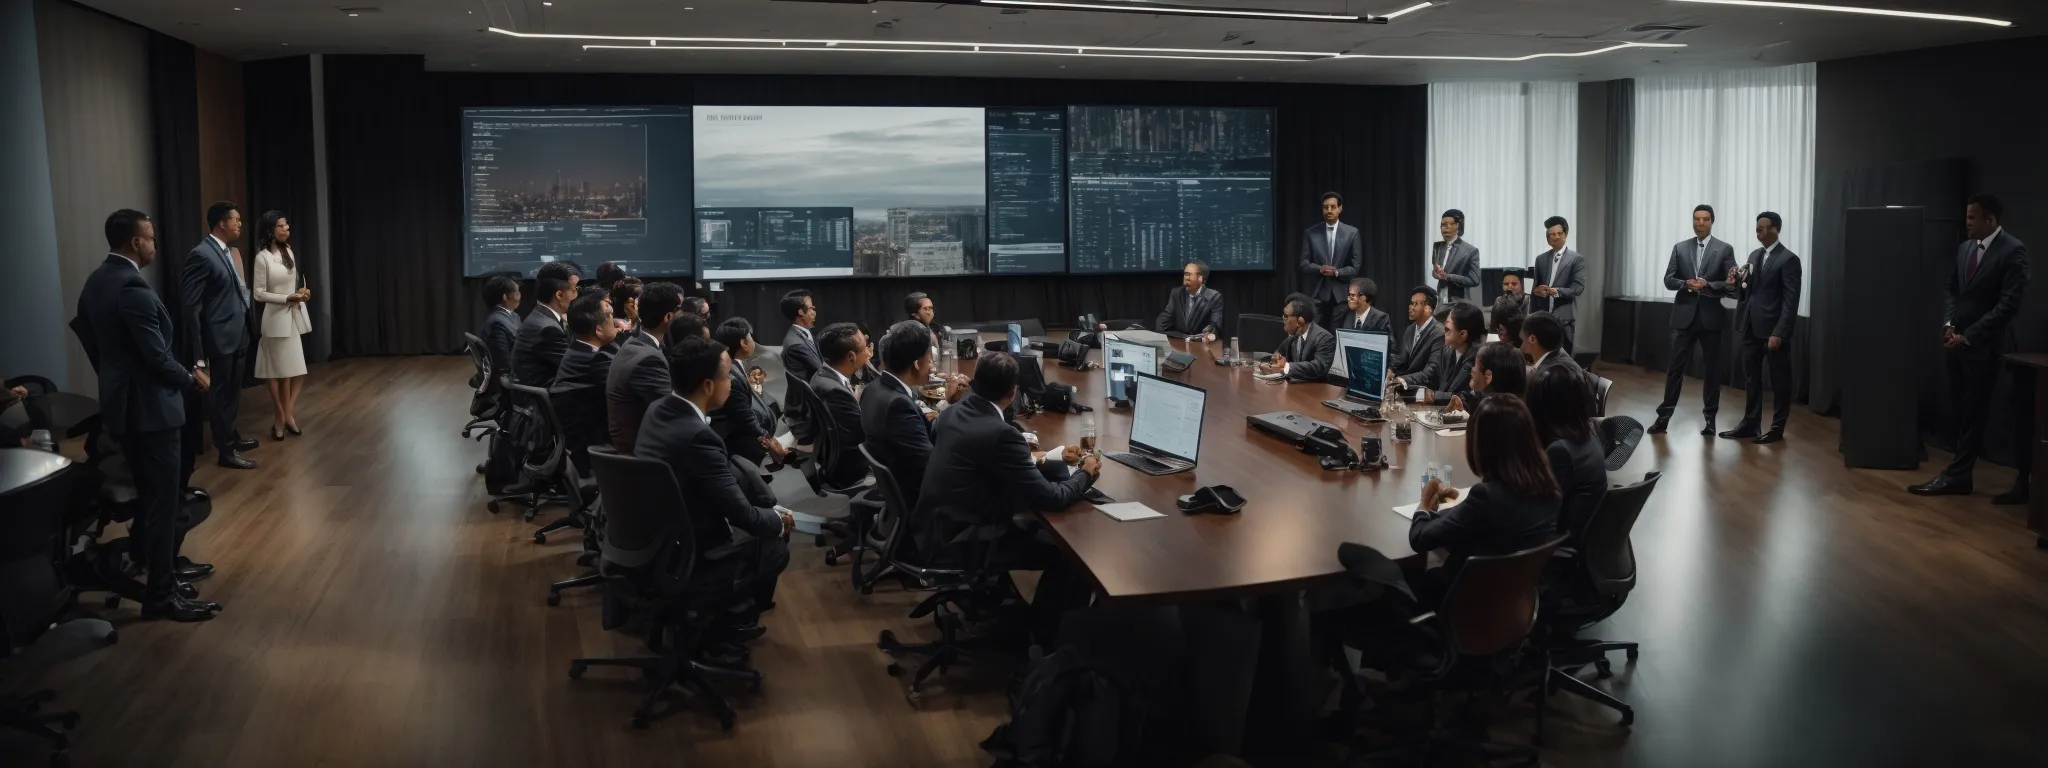 a diverse group of professionals gathered around a contemporary conference table, intently analyzing real-time digital data analytics displayed on a large screen.